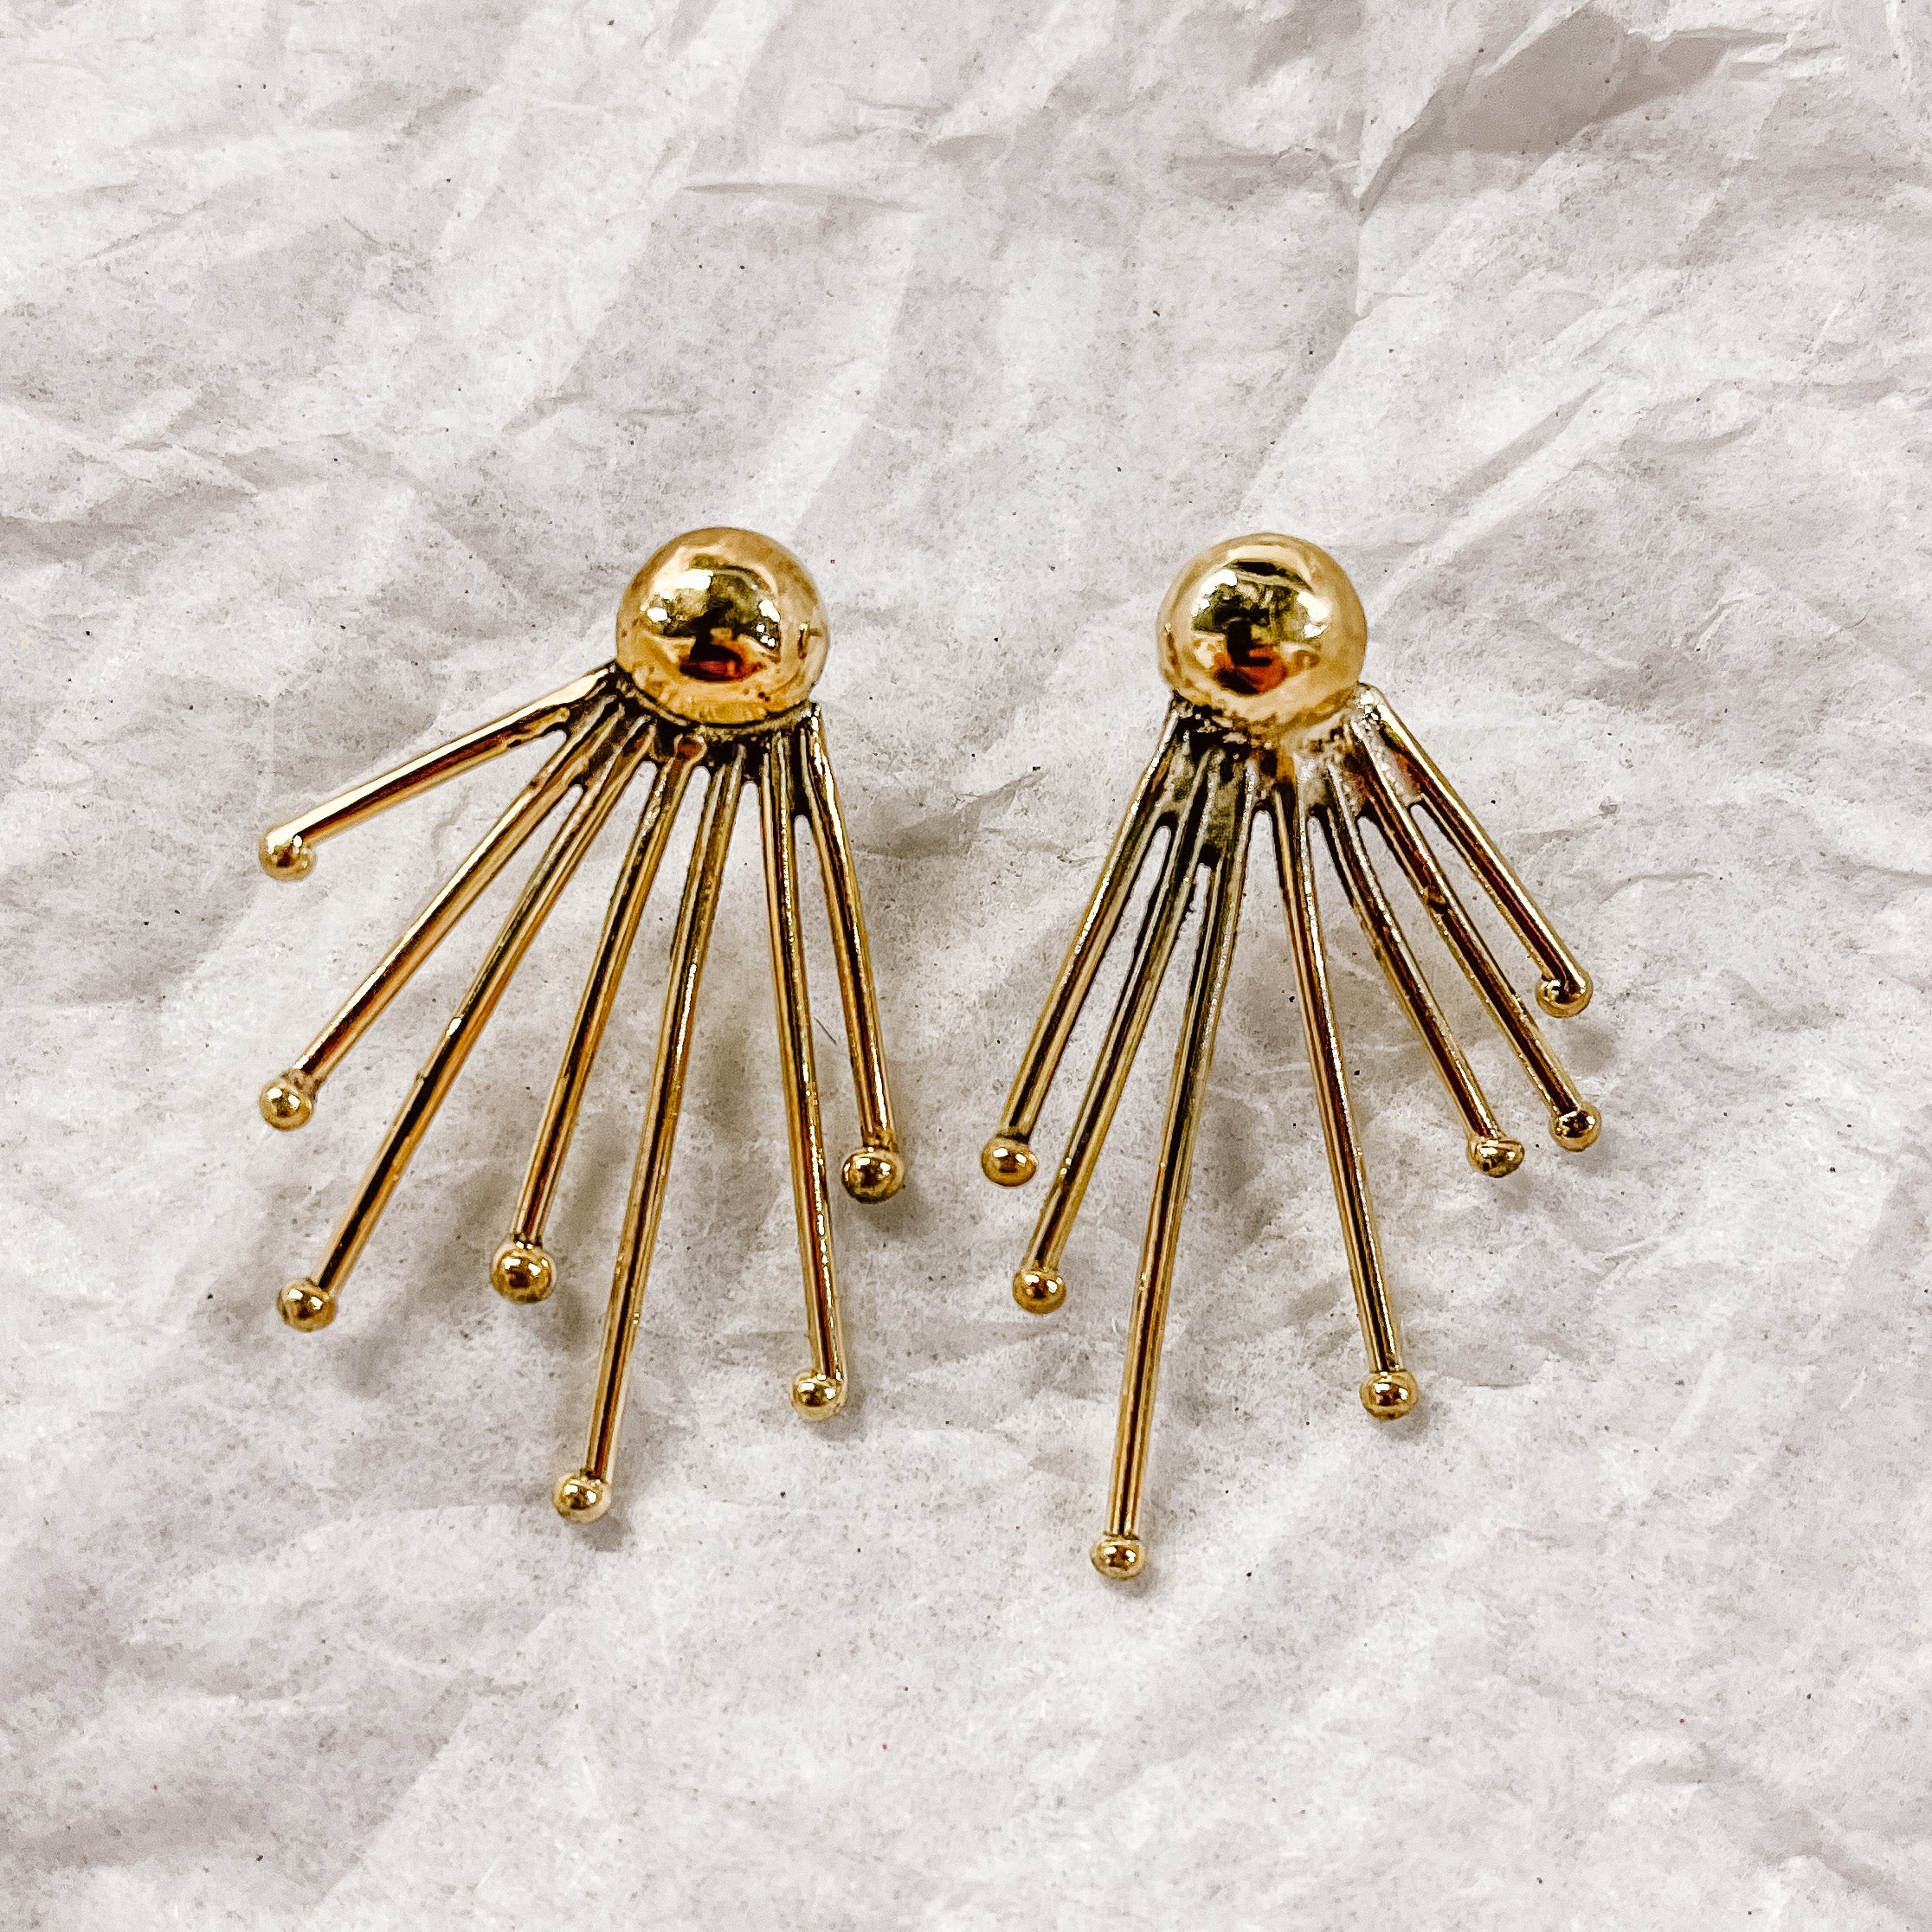 JustOne's brass earrings with lines coming out of the stud to resemble sunshine, handcrafted in Kenya